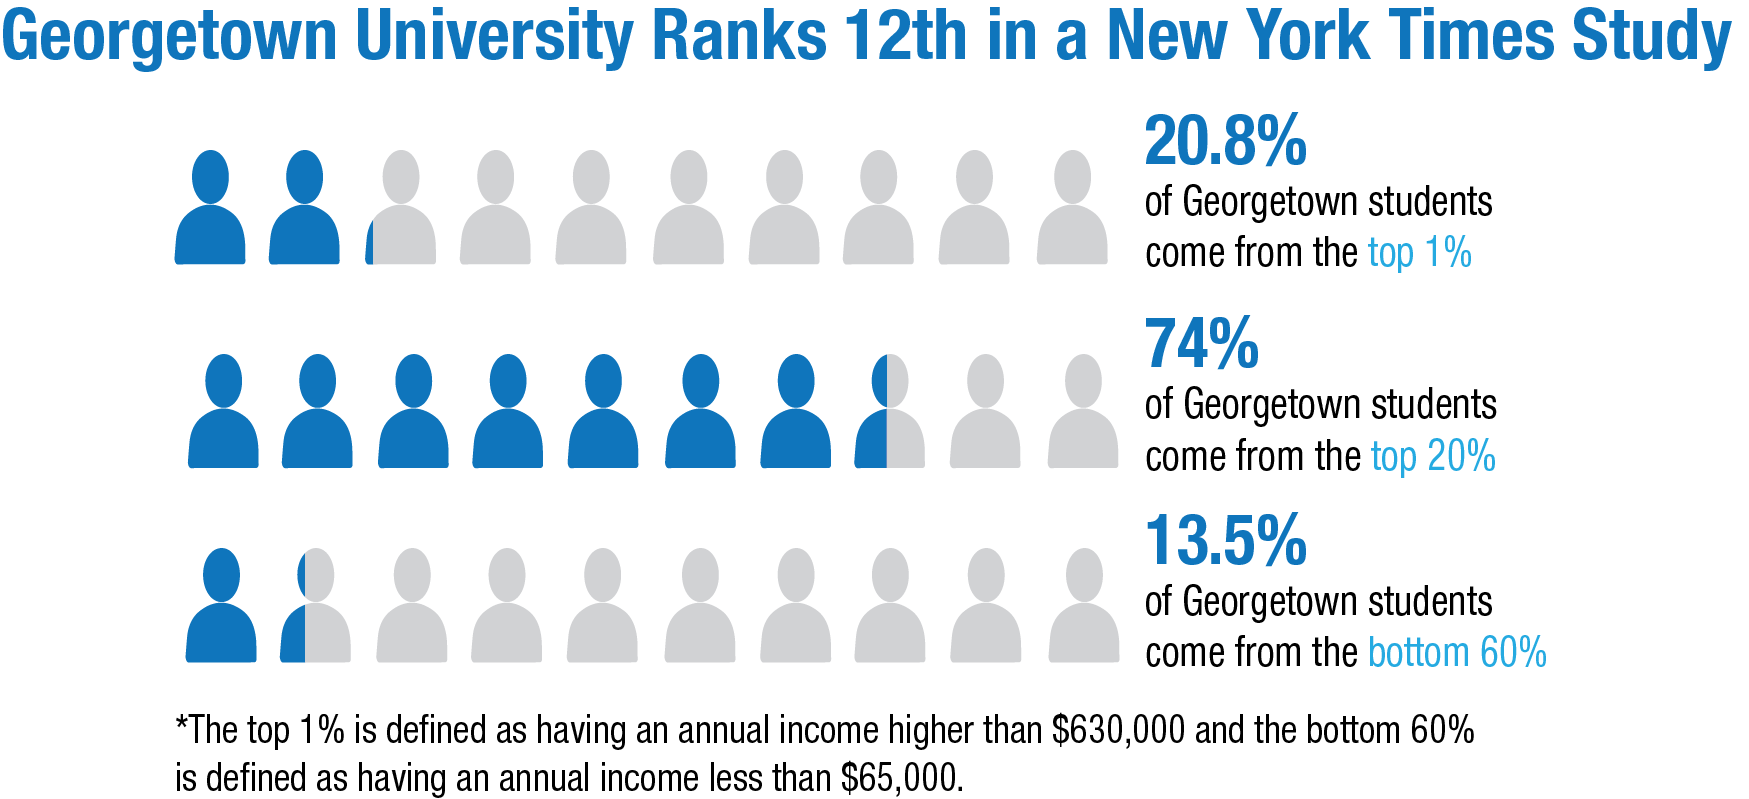 georgetown ranks 12th in study detailing income inequality